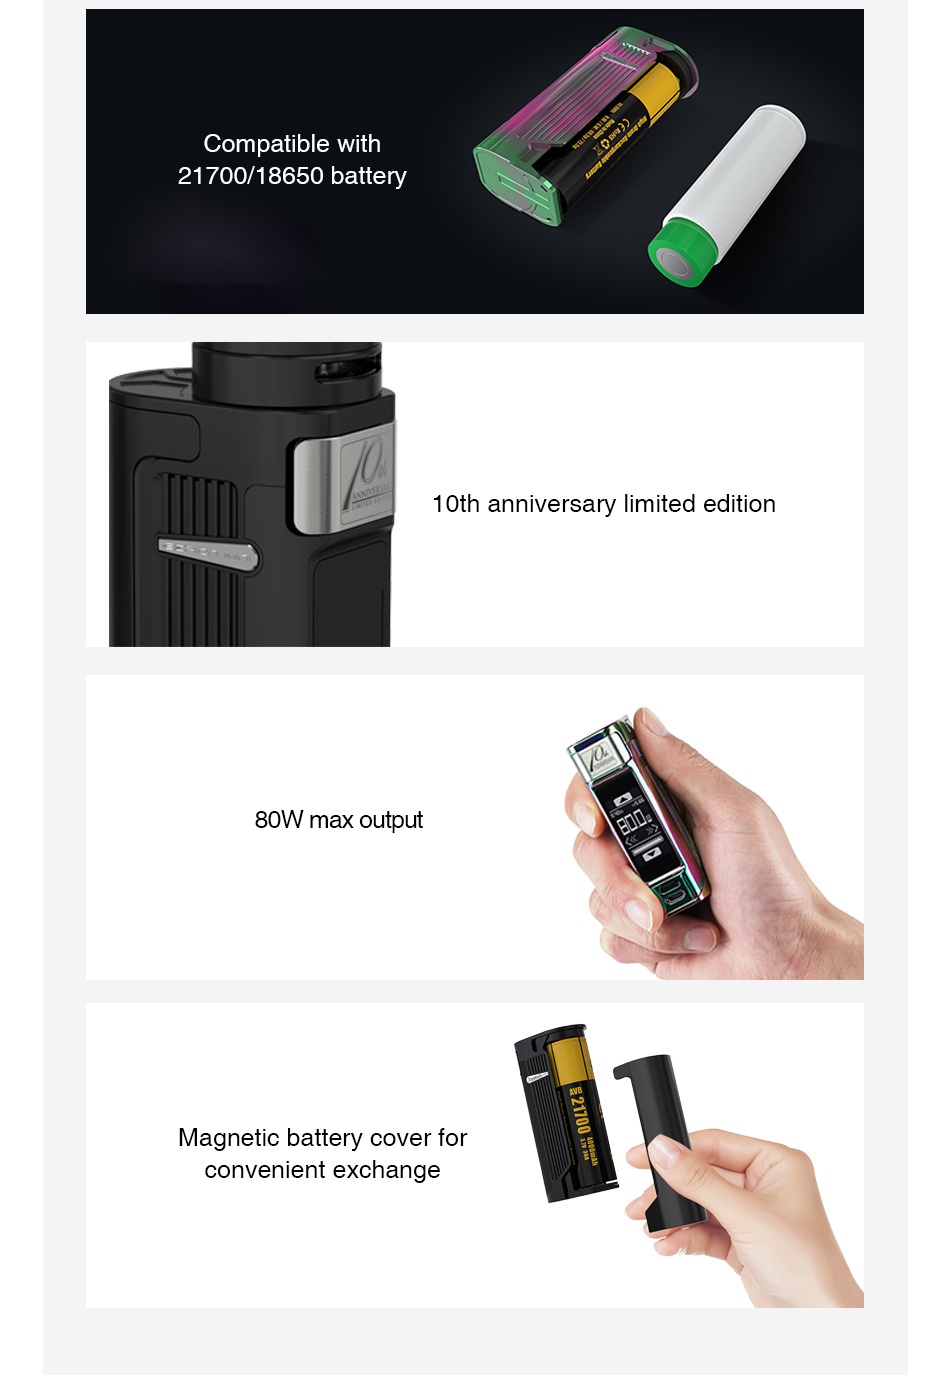 Joyetech ESPION Solo 21700 80W TC Box MOD 4000mAh Compatible with 21700 18650 battery 1oth anniversary limited edition 80W max output Magnetic battery cover for convenient exchange